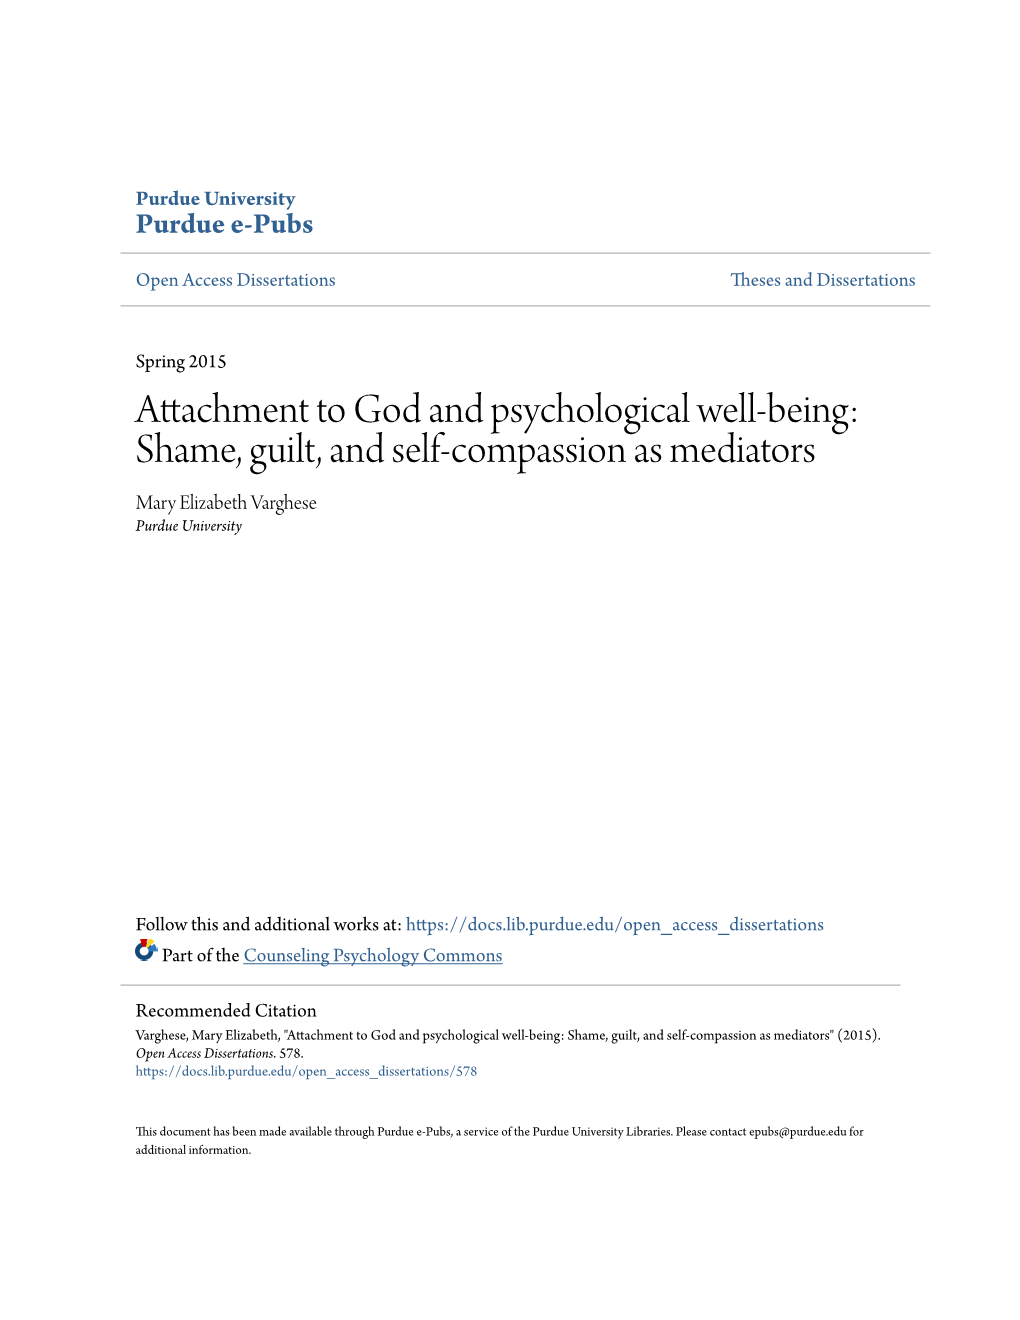 Attachment to God and Psychological Well-Being: Shame, Guilt, and Self-Compassion As Mediators Mary Elizabeth Varghese Purdue University